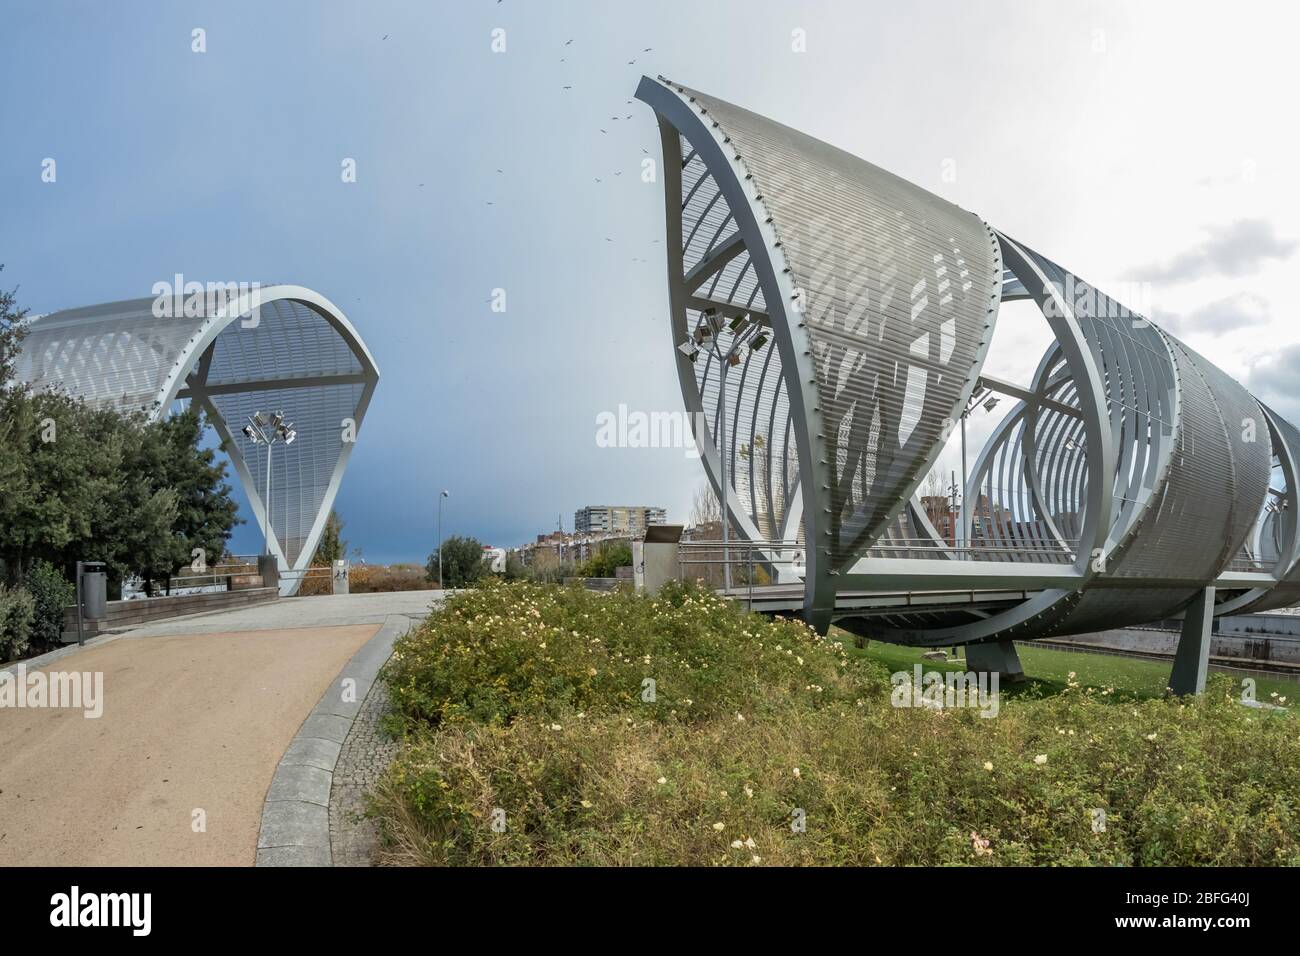 MADRID, SPAIN - DECEMBER 13, 2018: The Arganzuela bridge over Manzanares River downtown Madrid, Spain. It is a futuristic structure built in 2011. Stock Photo